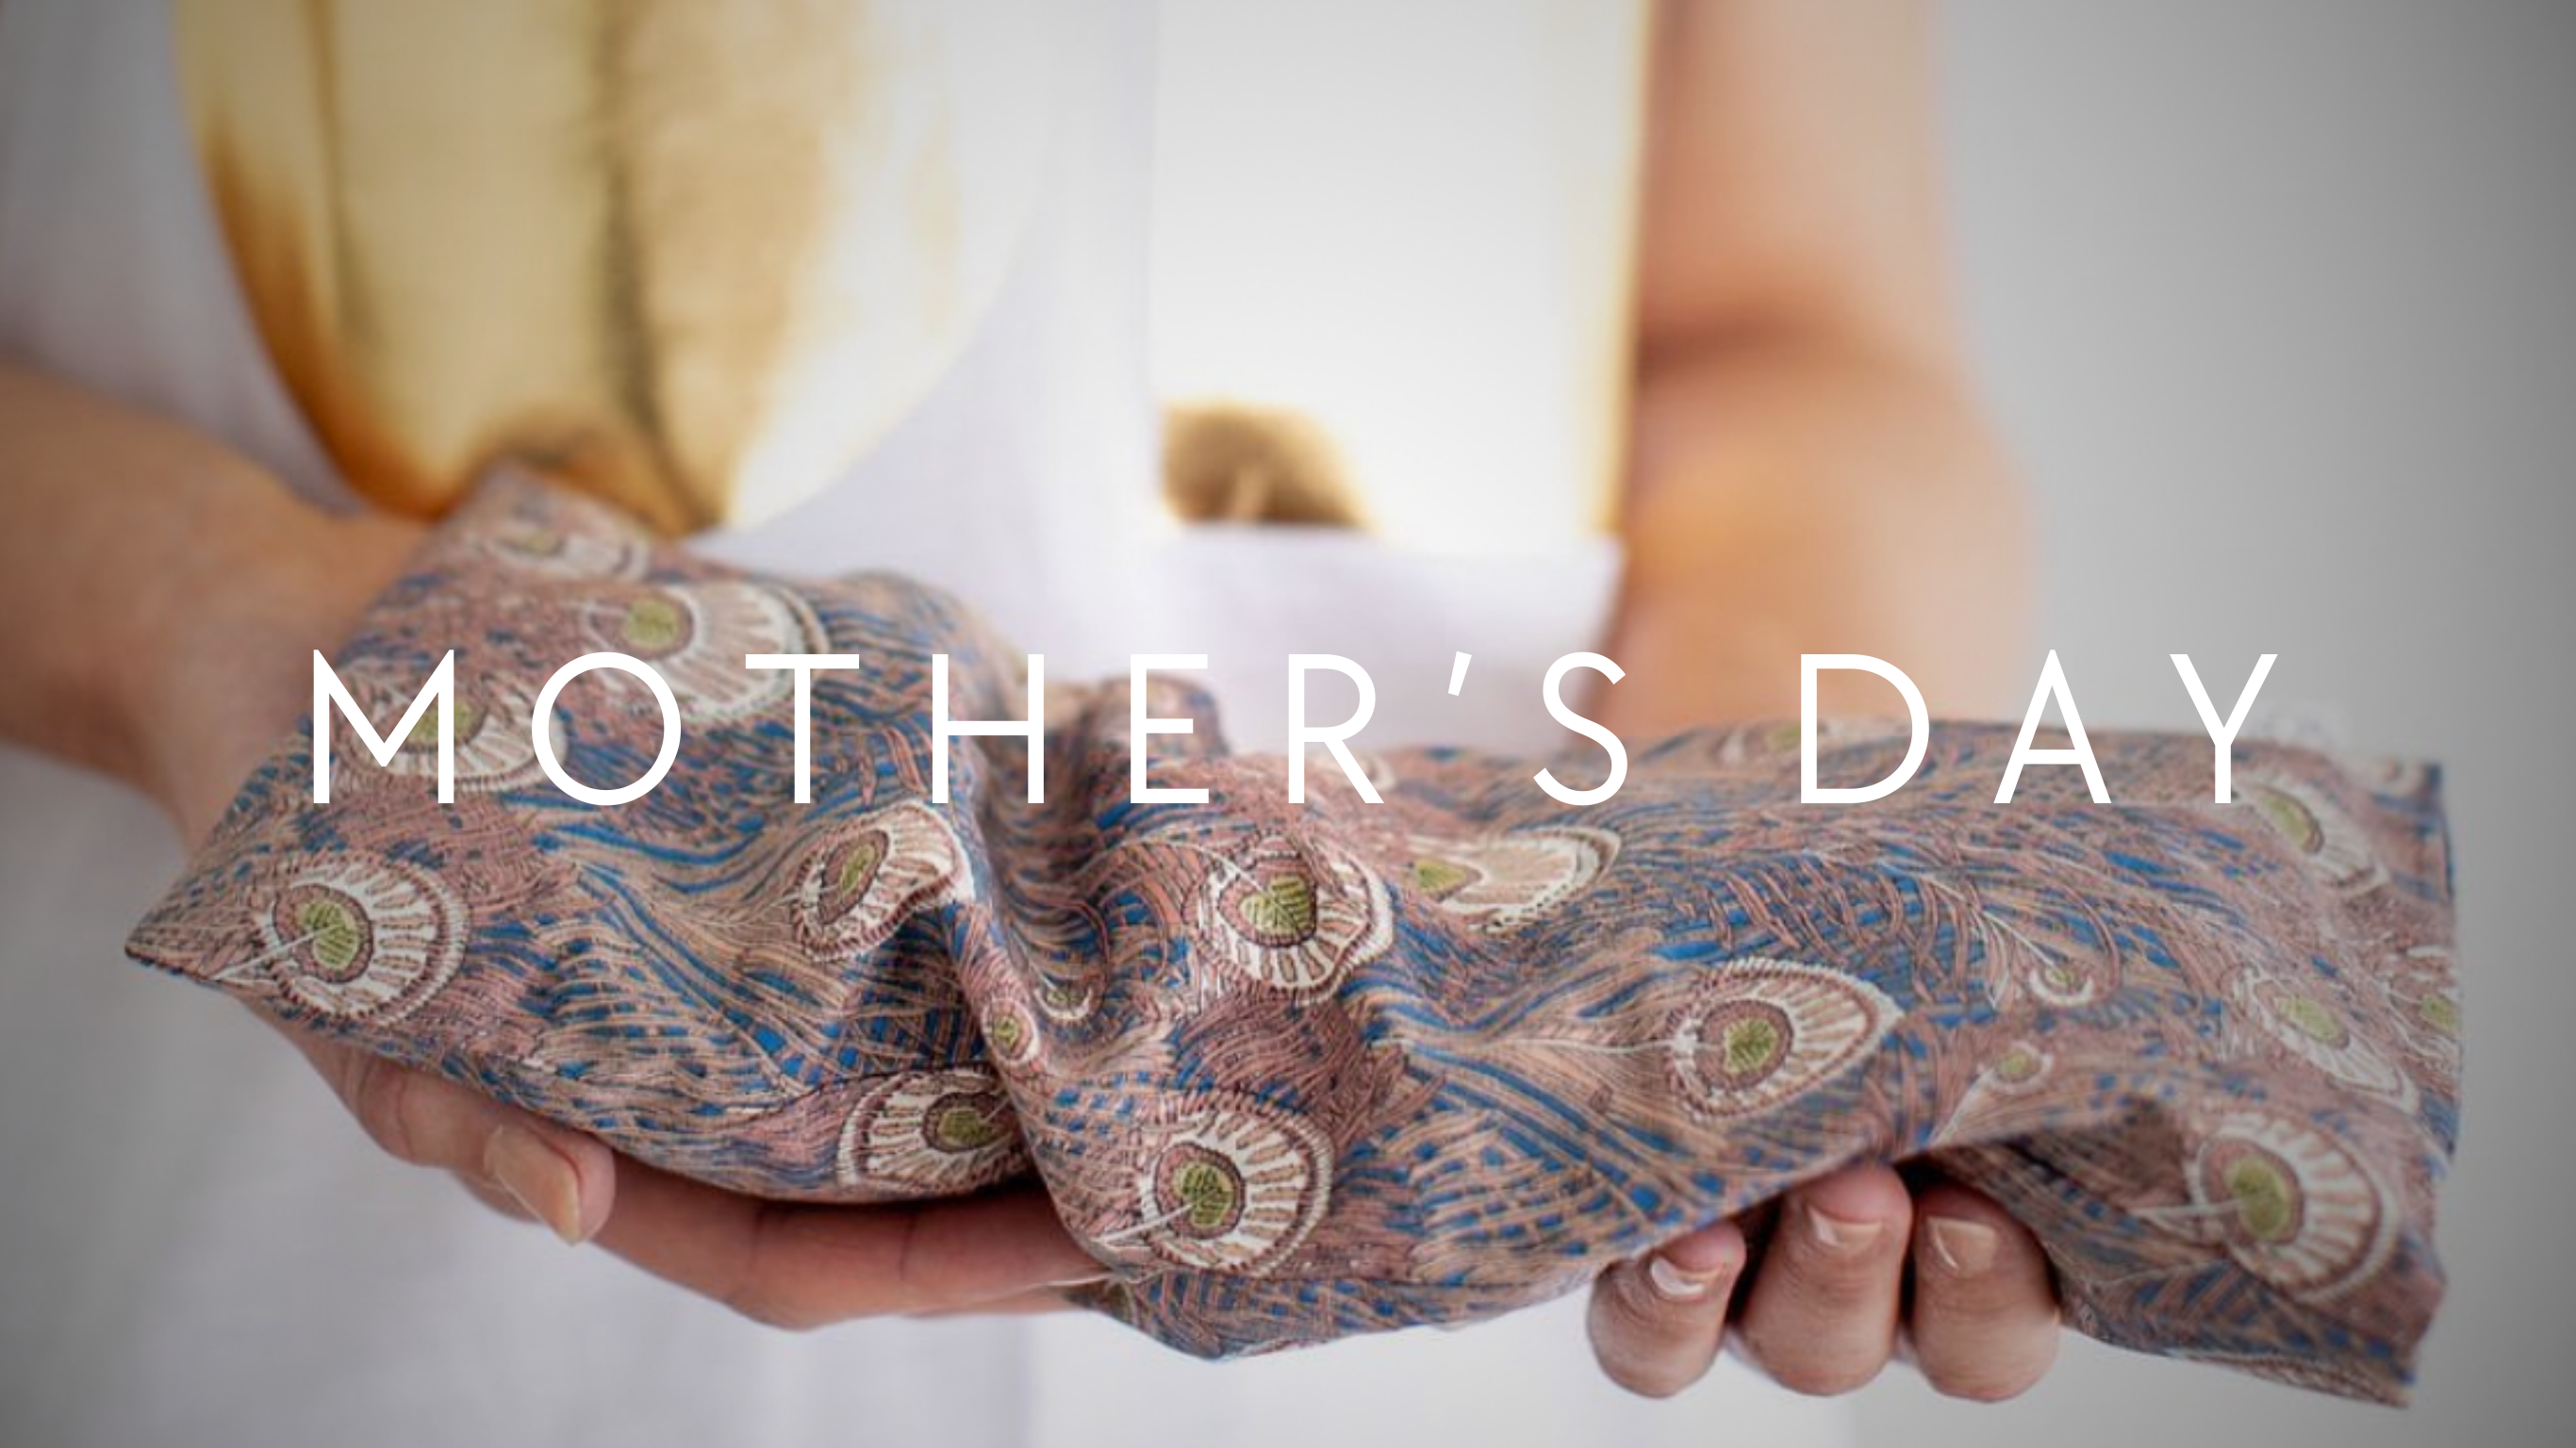 Mother's Day Gift Ideas from Spritz Wellness